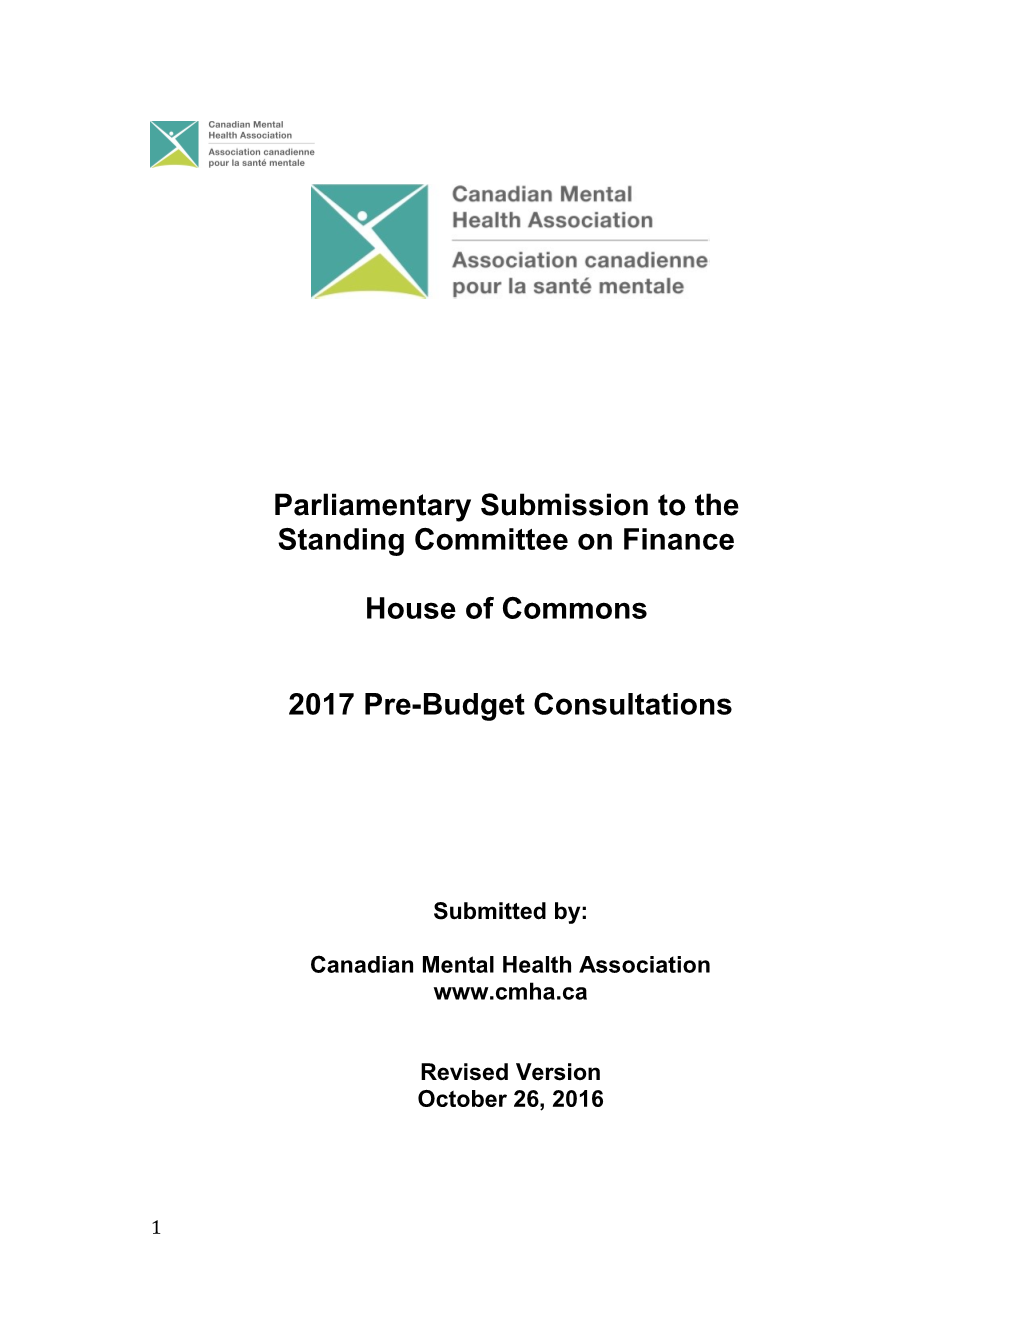 Parliamentary Submission to The